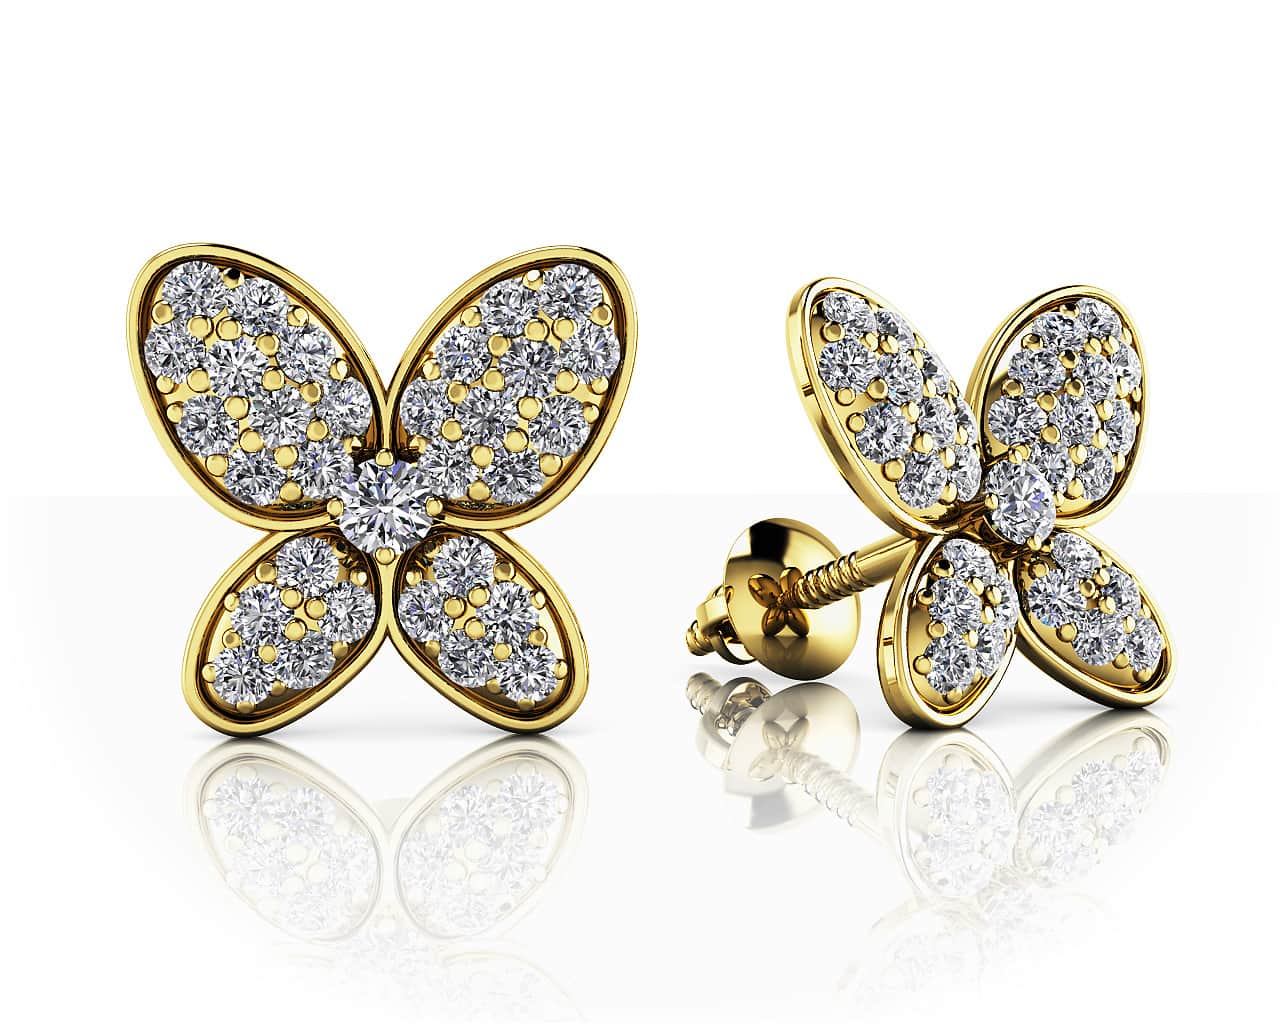 Charming Butterfly Diamond Studs Earrings 1/3 Carat Total Weight